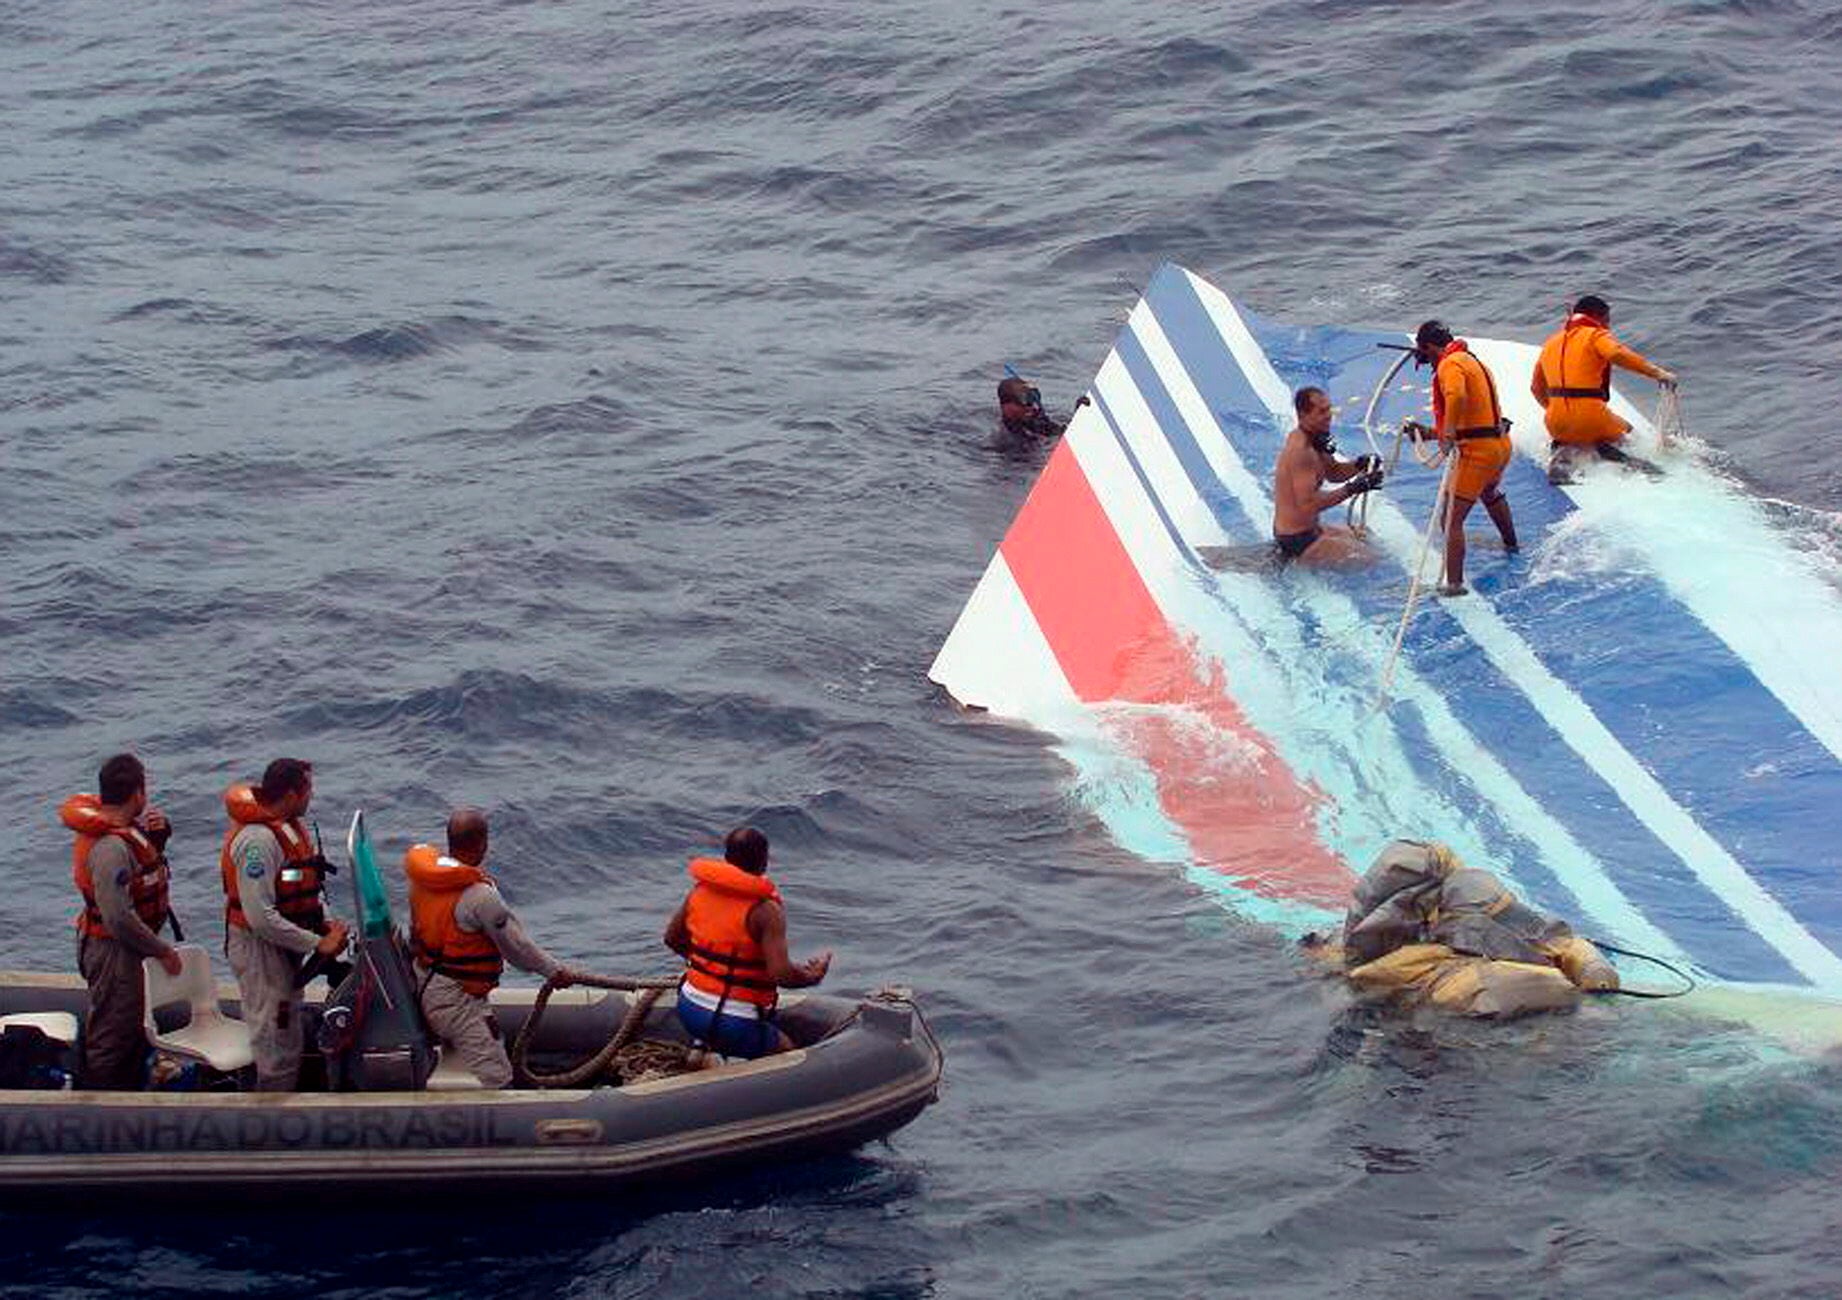 Marines recover debris from Air France plane during search operations in 2009